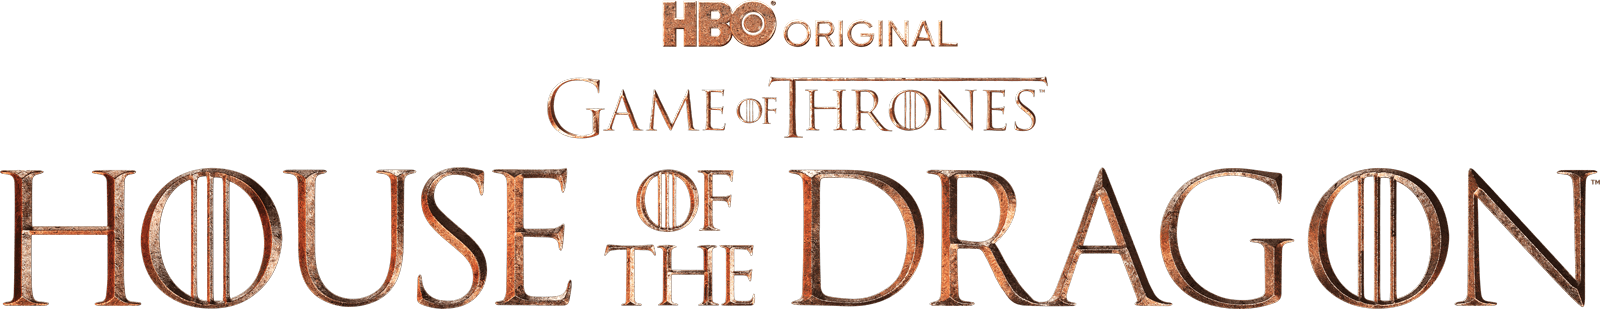 House of the dragon wiki. House of the Dragon лого. House of the Dragon персонажи. House of Dragon Reinira. House of the Dragon Team Green.